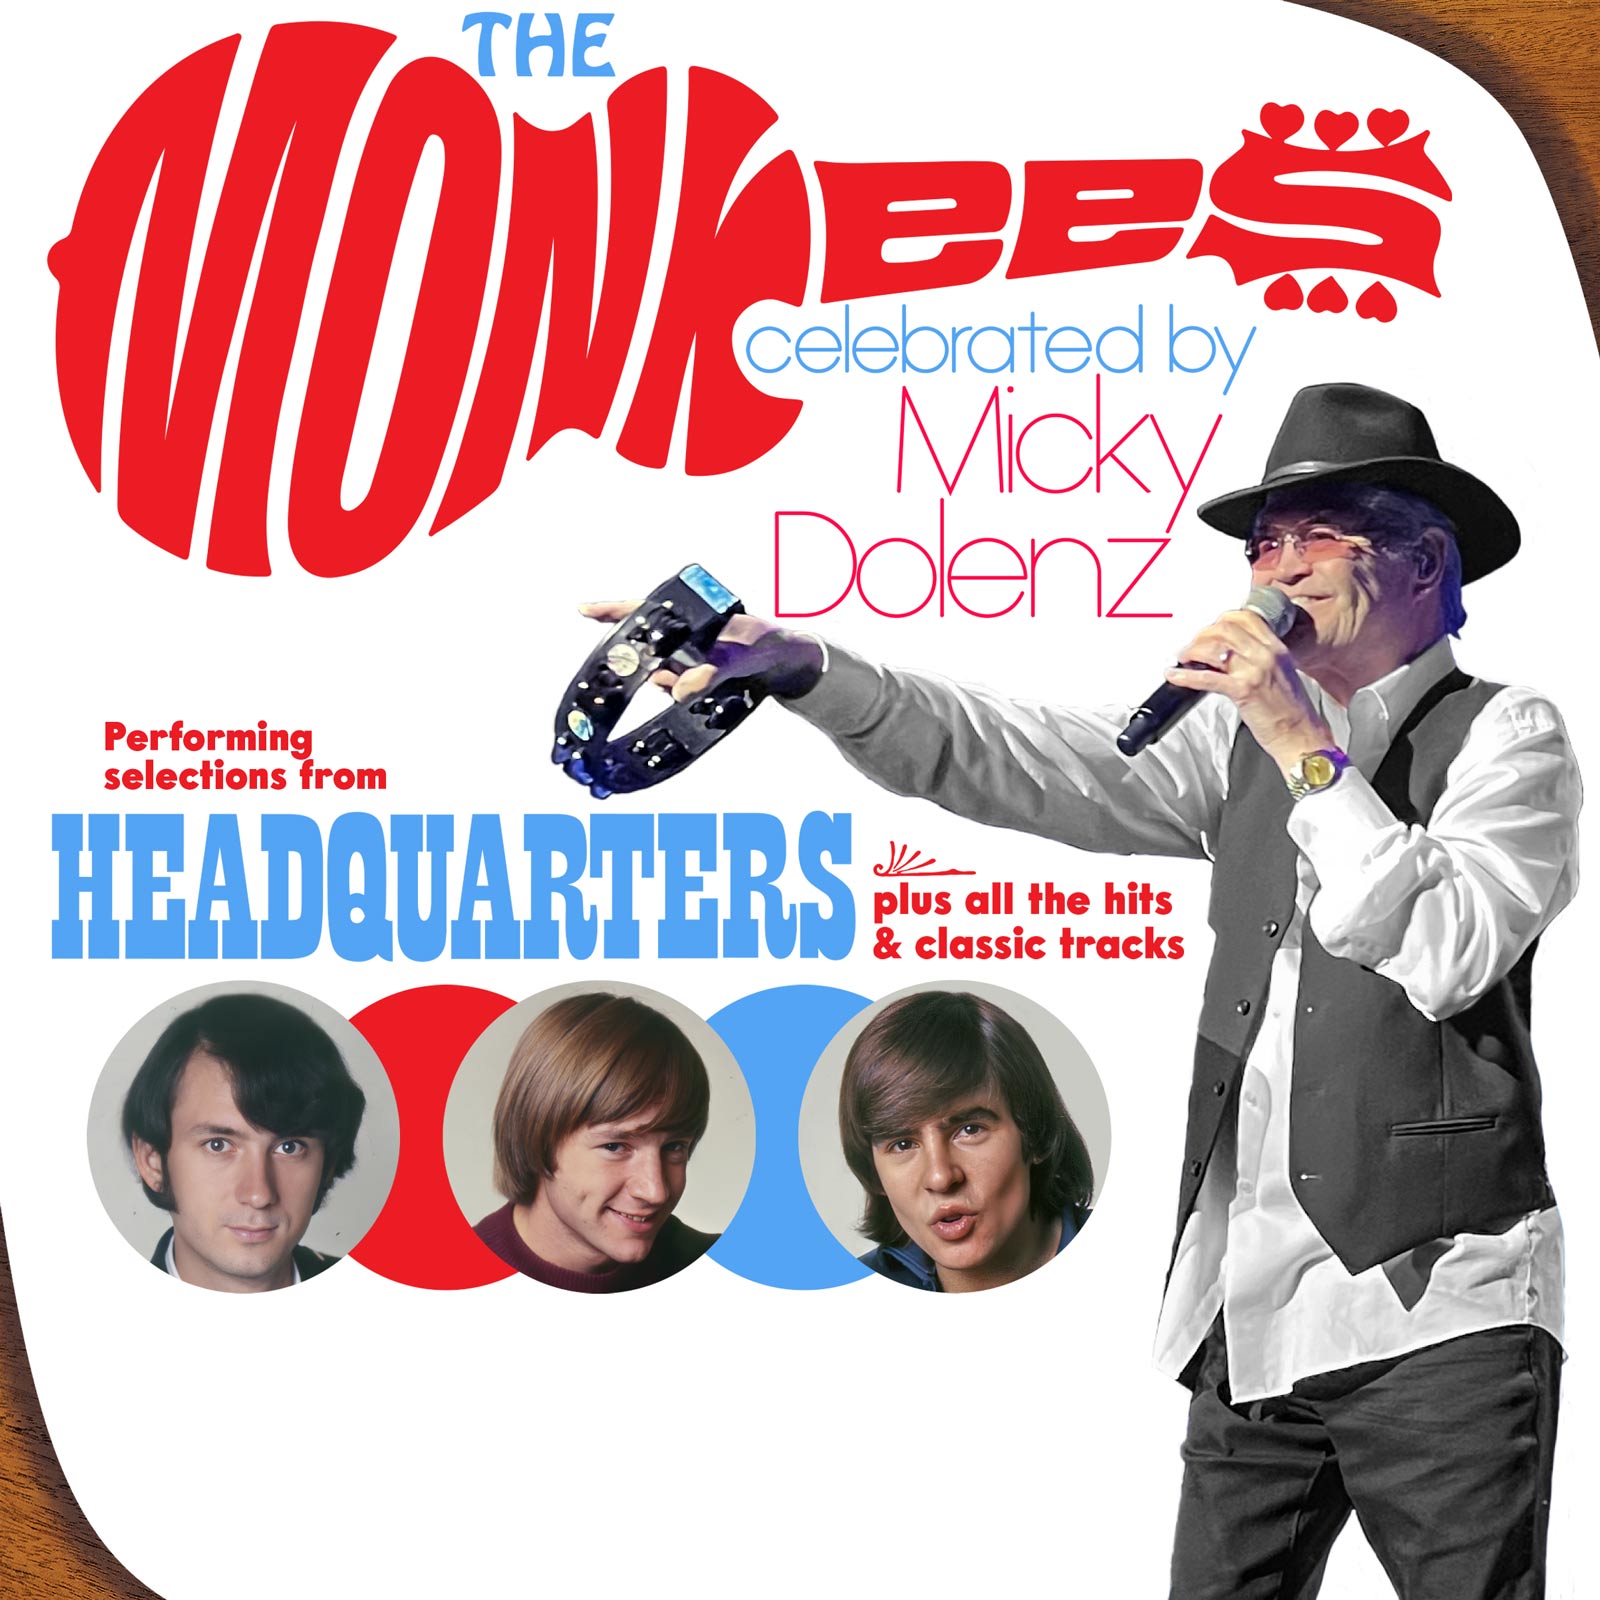 `The Monkees Celebrated by Micky Dolenz` image courtesy of Niagara Casinos.